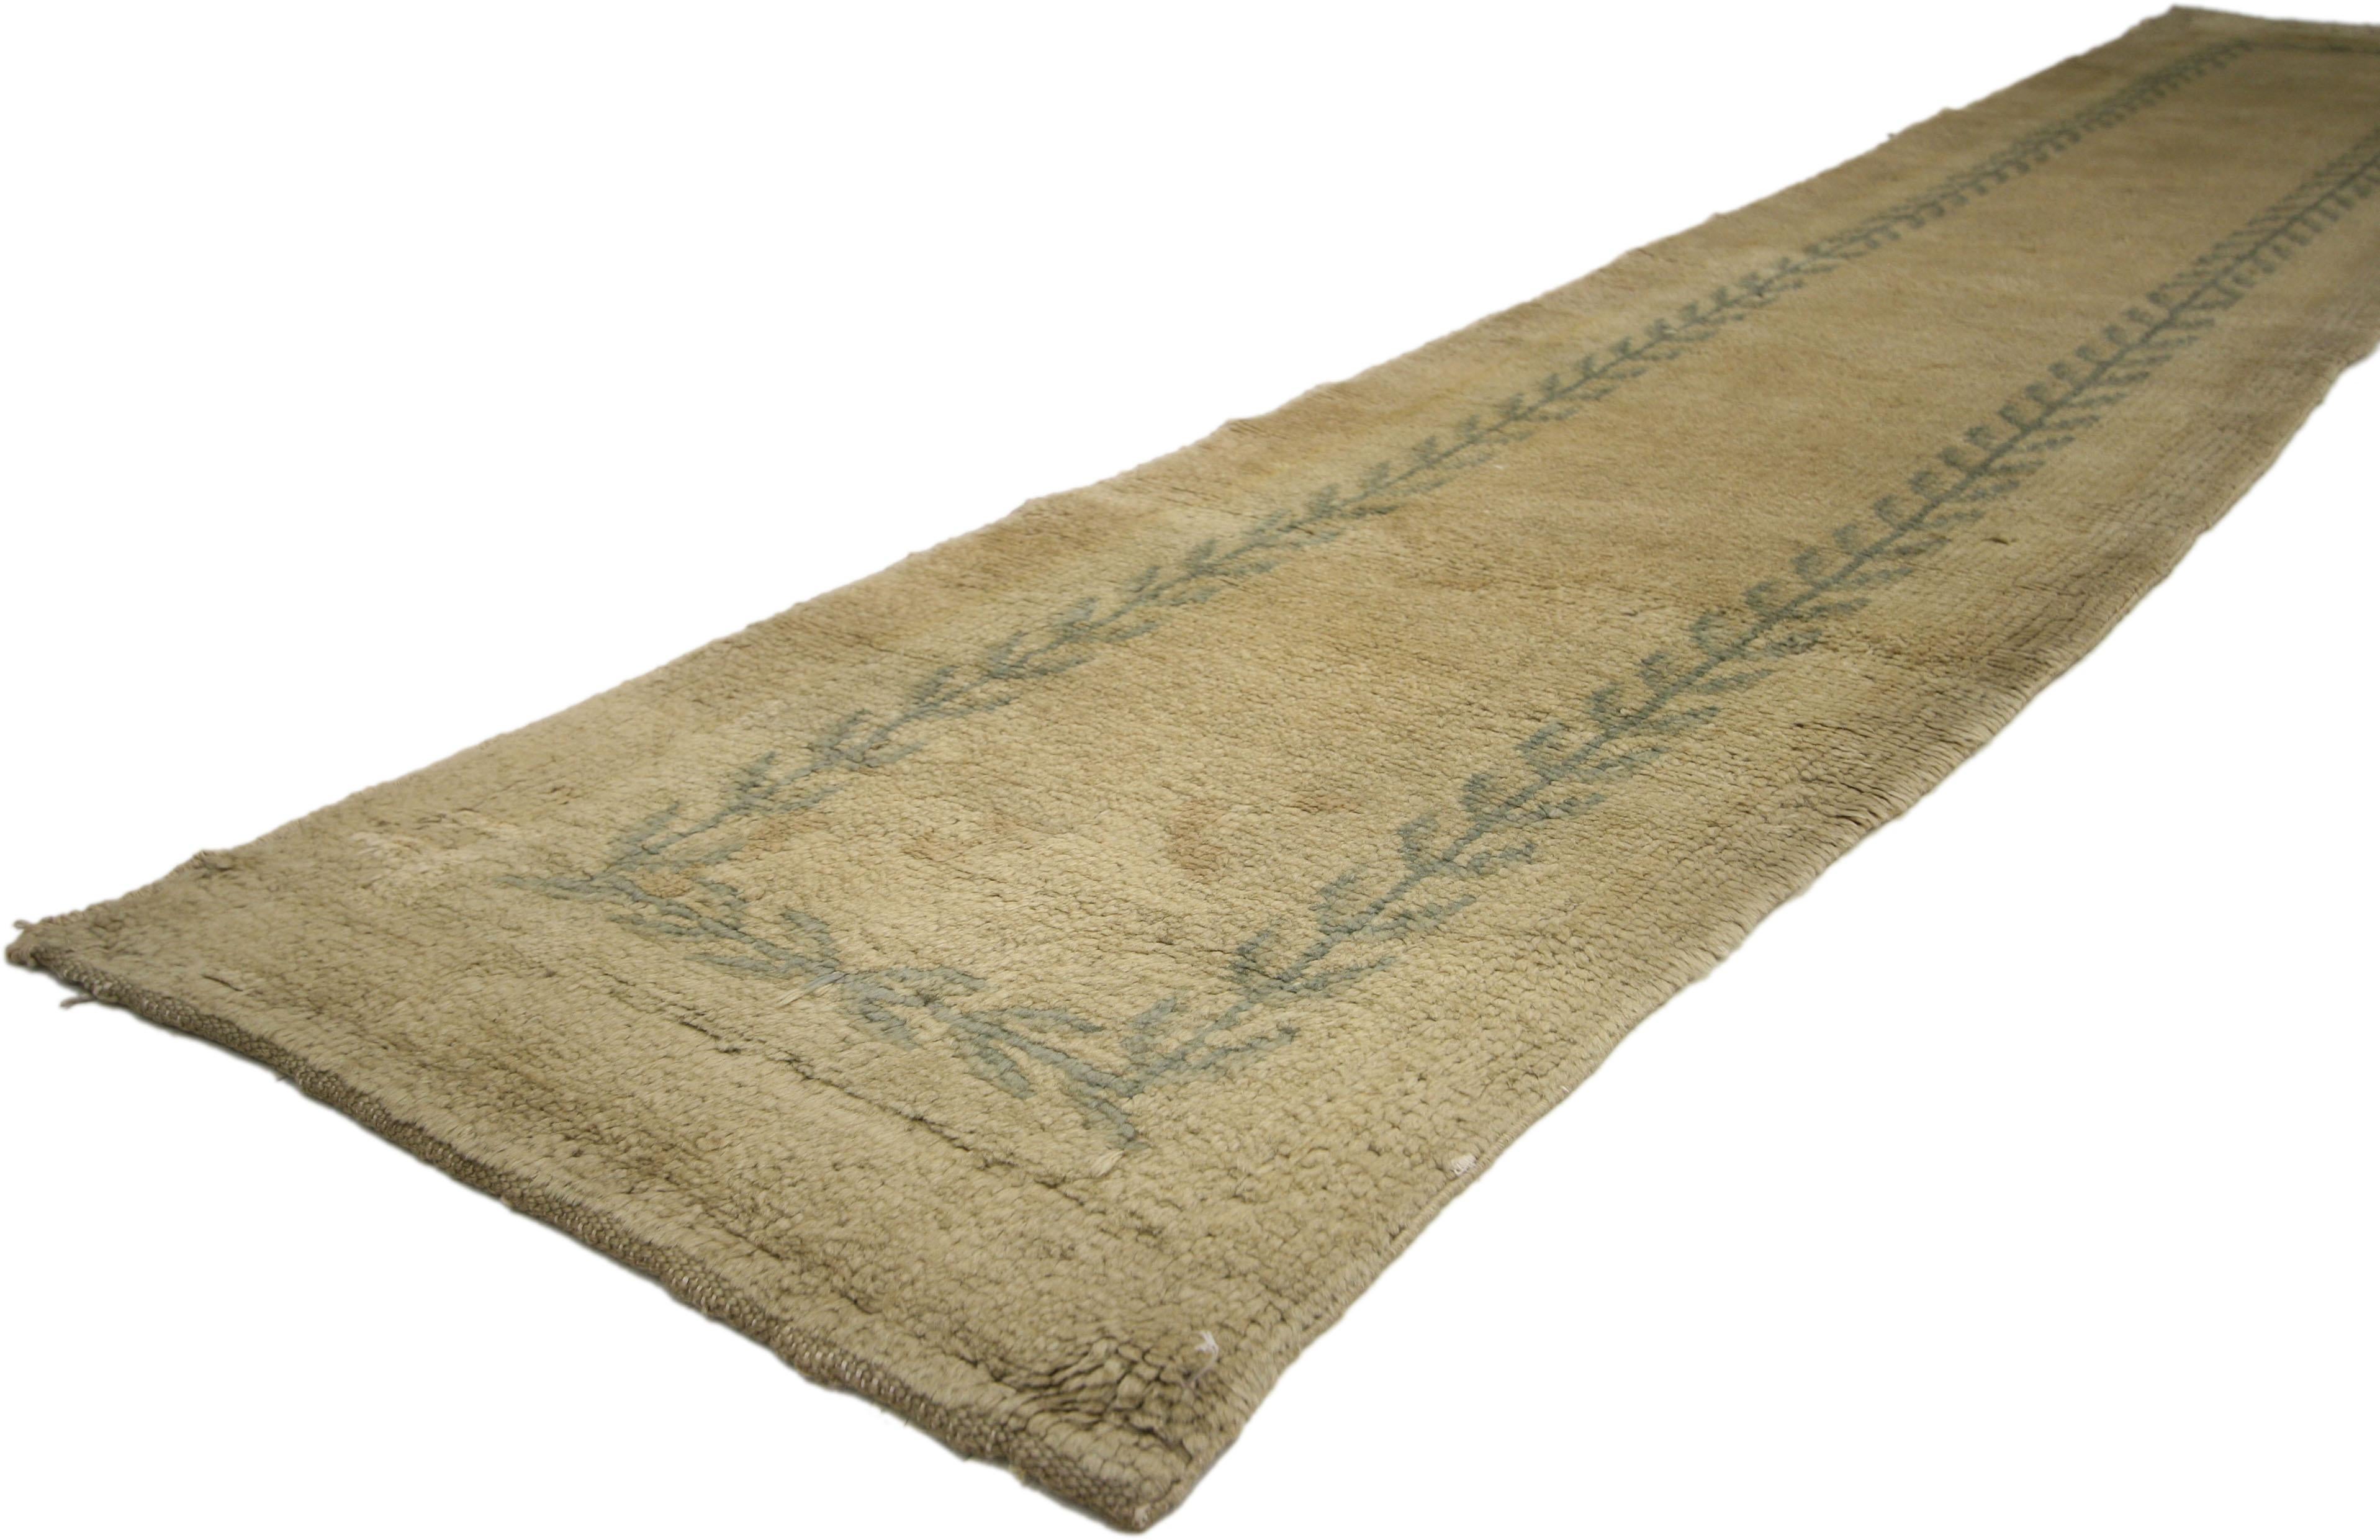 73249 Antique Savonnerie Runner with French Country Style, Narrow Hallway Runner. This hand-knotted wool antique Savonnerie runner features a French Country style. The narrow antique Savonnerie runner displays an open field with a simple wreath like